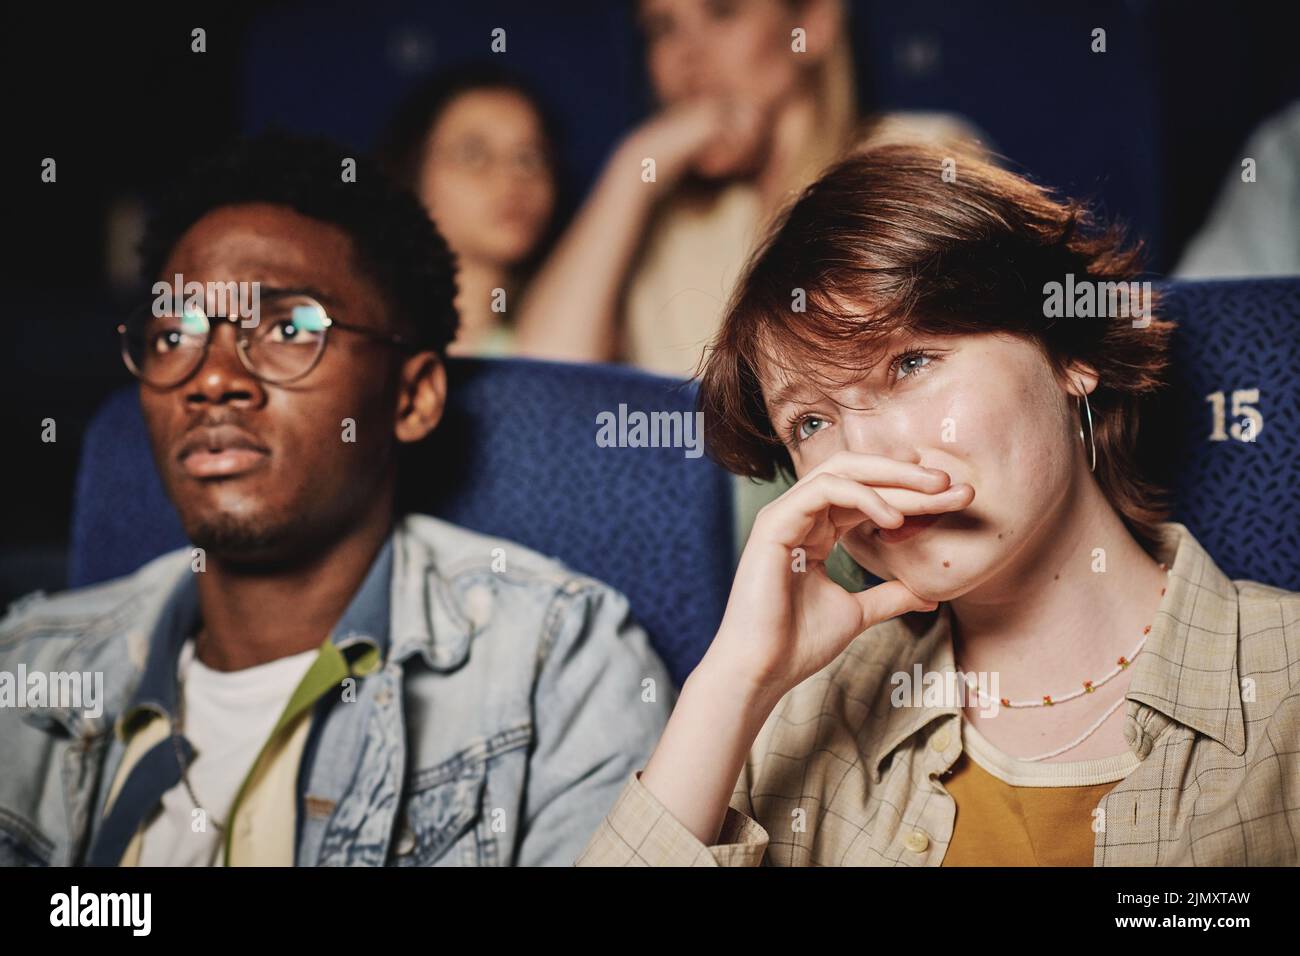 Medium close-up portrait of young Black mana and Caucasian woman spending evening together crying while watching tragedy movie at cinema Stock Photo